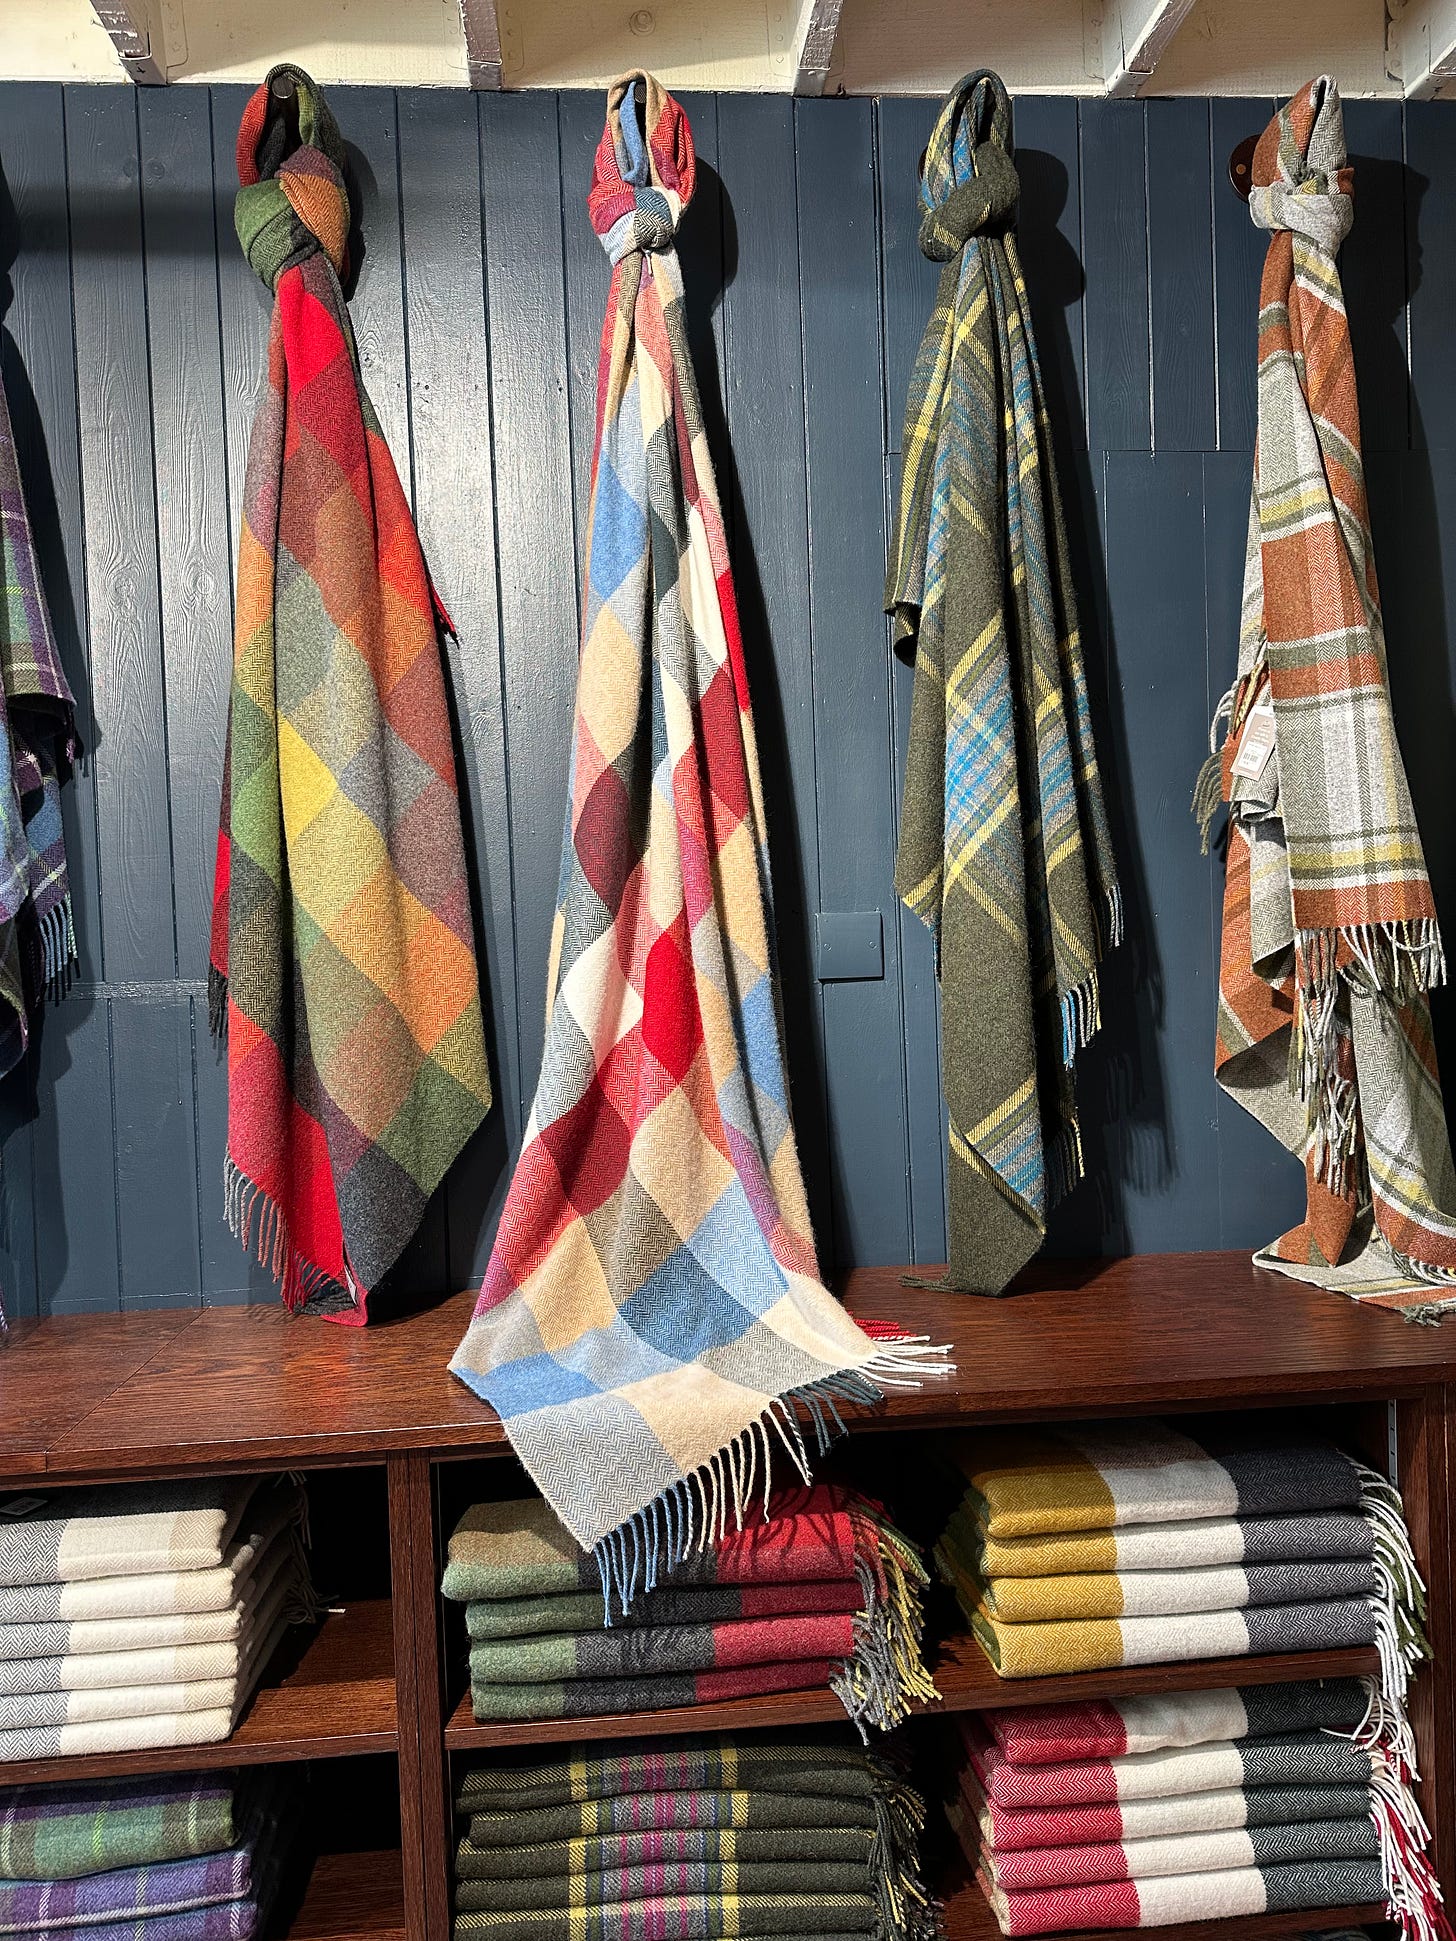 Selection of wool scarves and shawls at Foxford